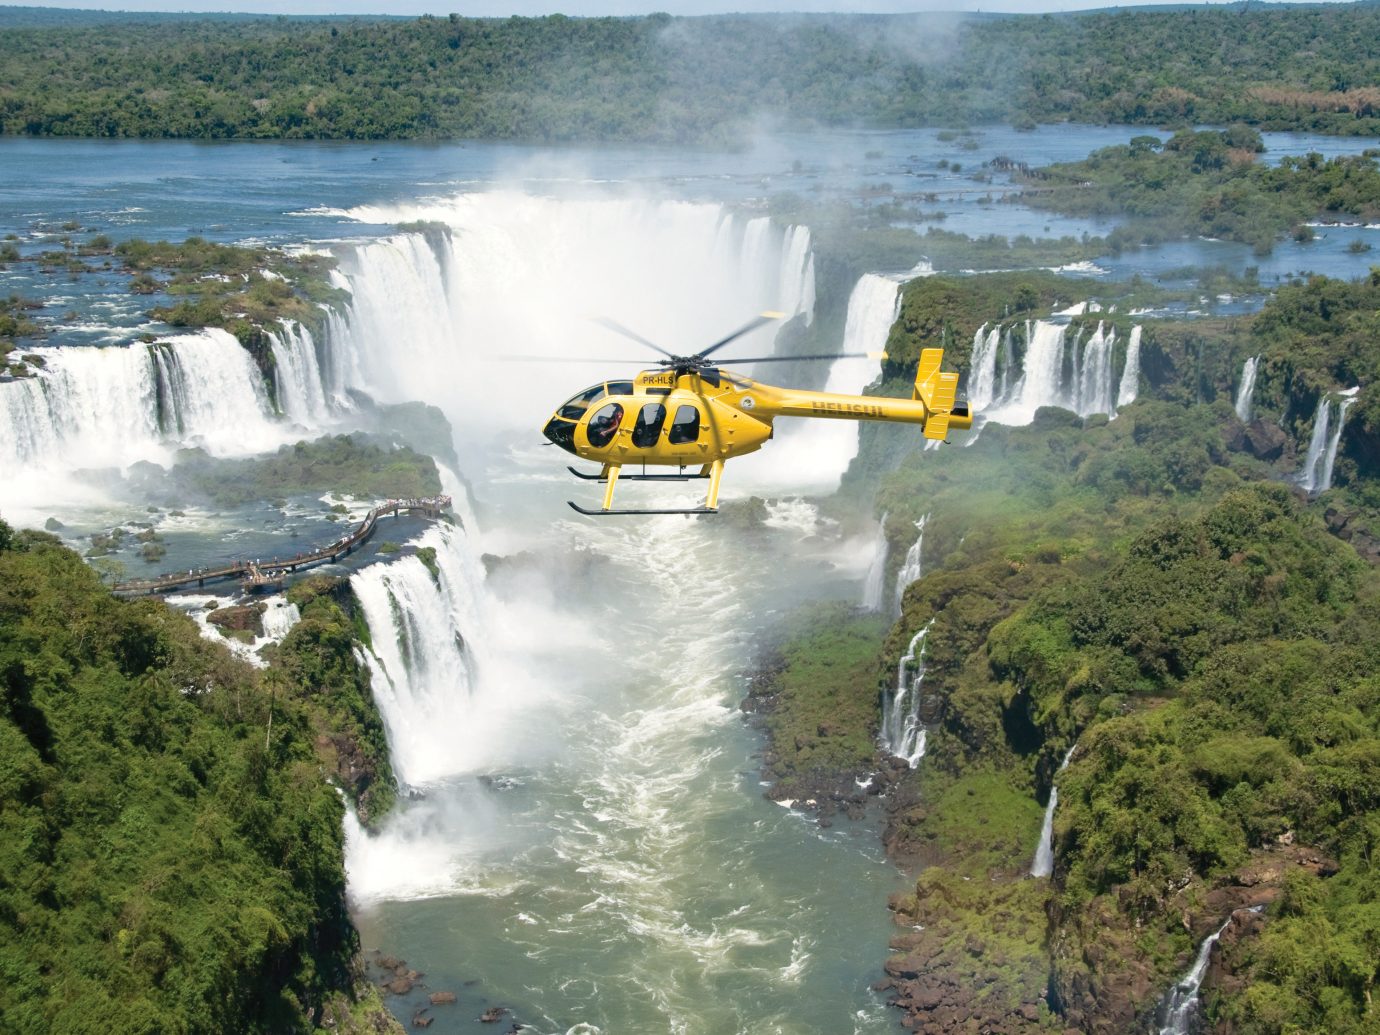 Helecopter Going Over Waterfall In Brazil By Belmond Hotel, Iguacu National Park